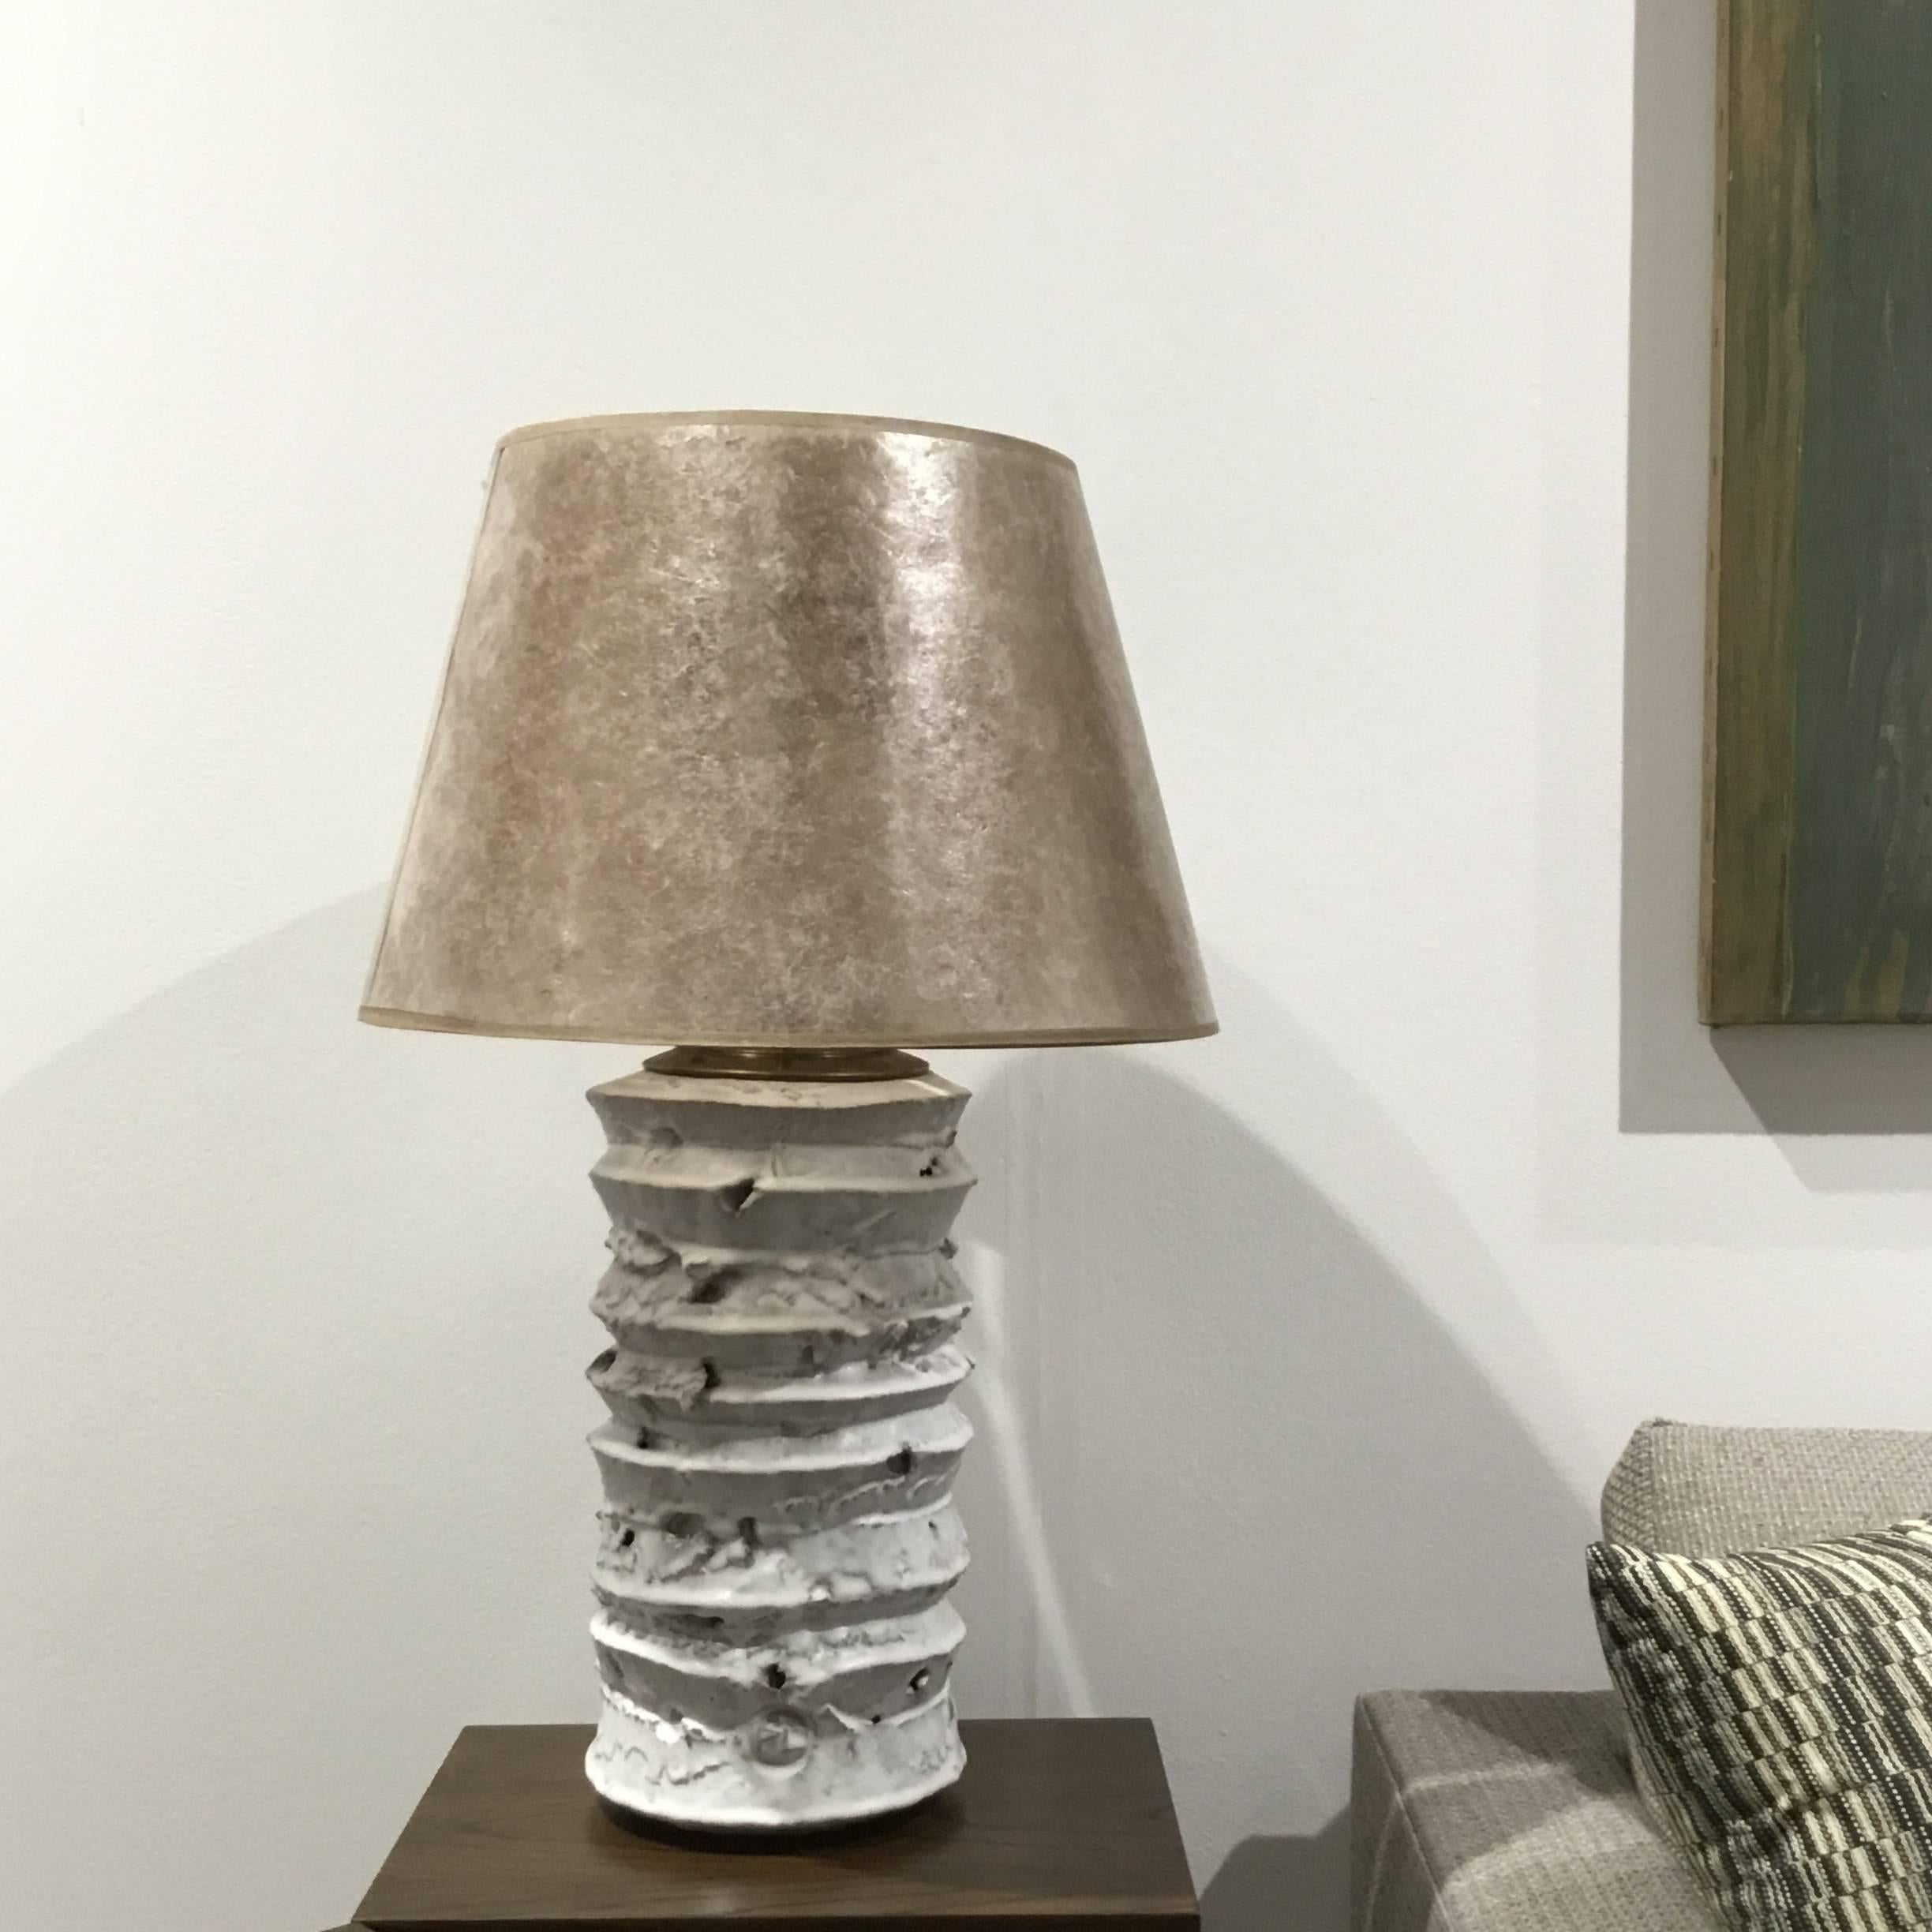 Peter Lane sculptures turned into lamps. White glazed rough texture.
Measure: Base height is 15